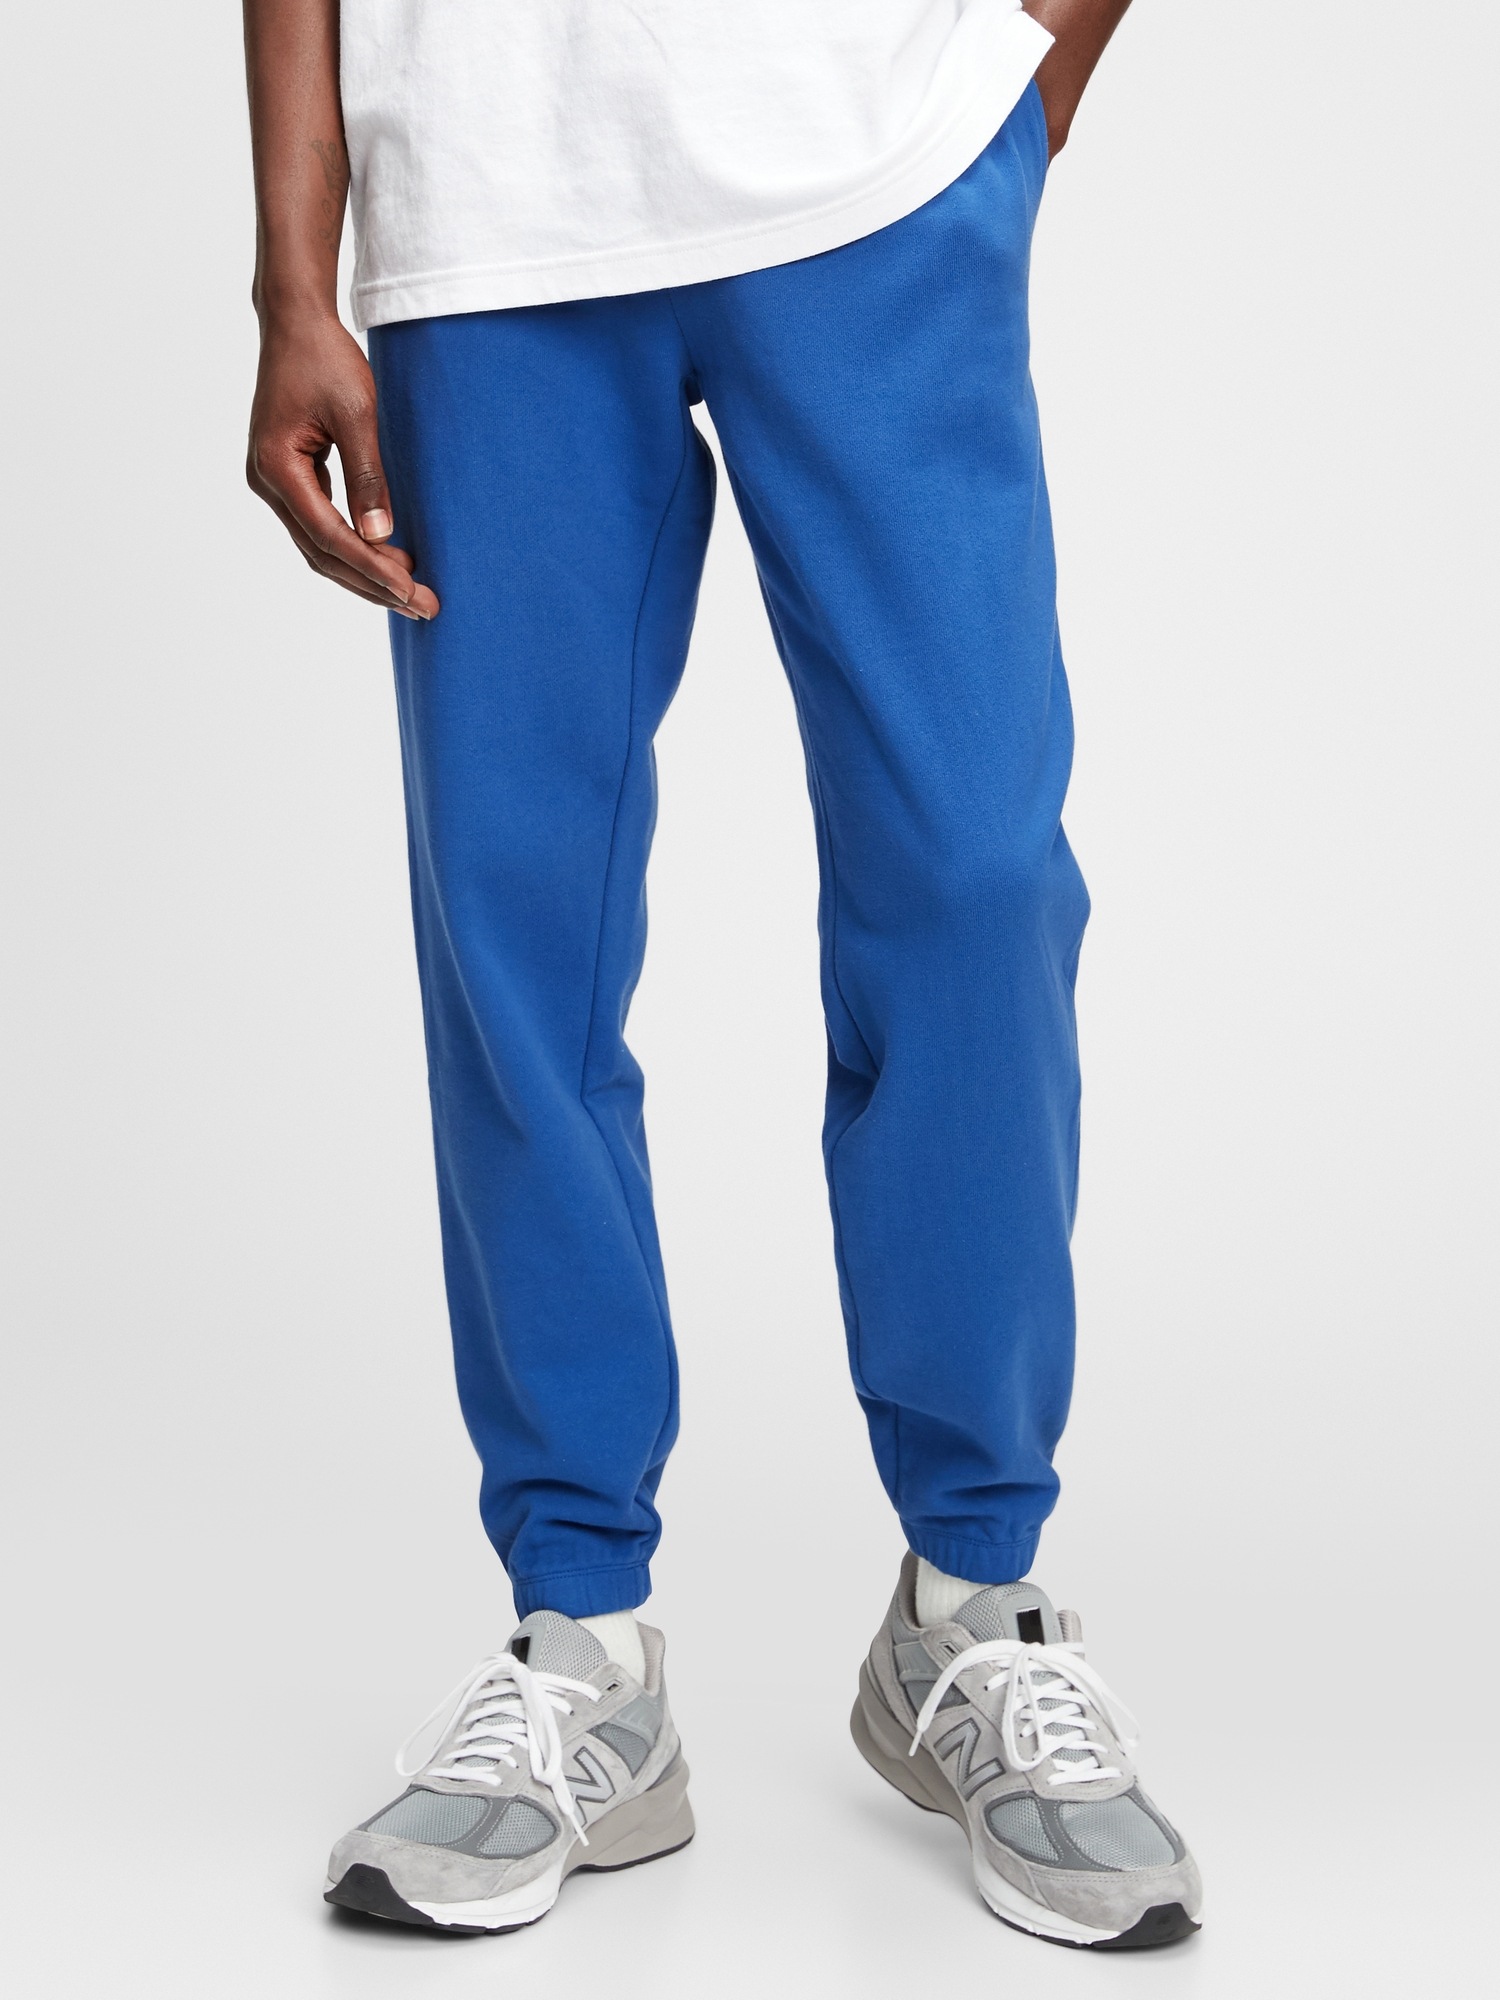 French Terry Joggers | Gap